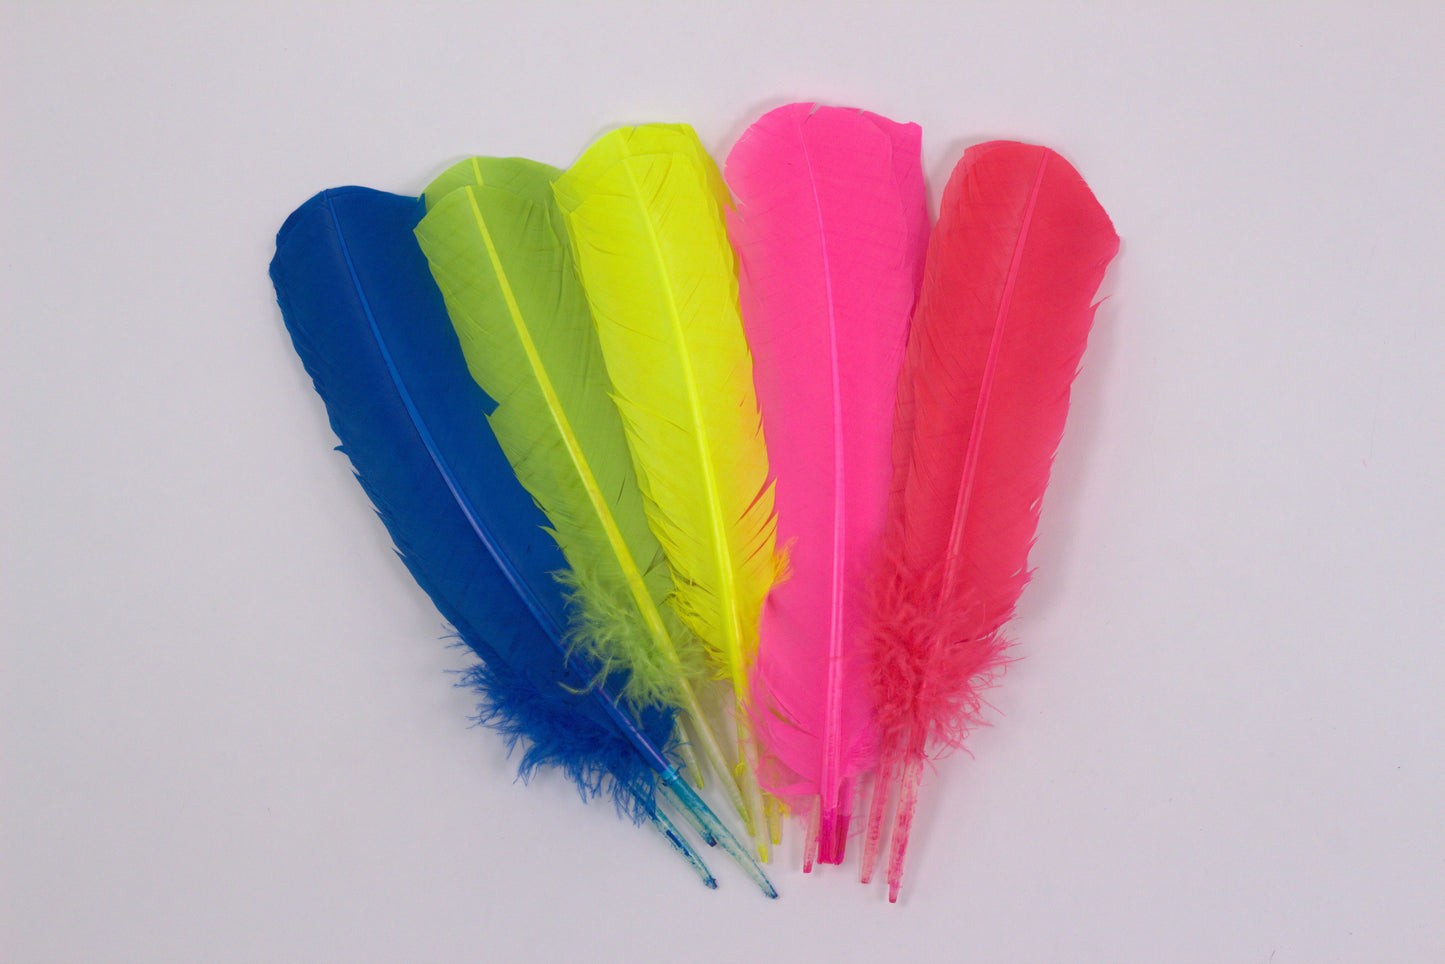 15 PCS Turkey quills Mix Dyed Feathers 10-12" - Neon